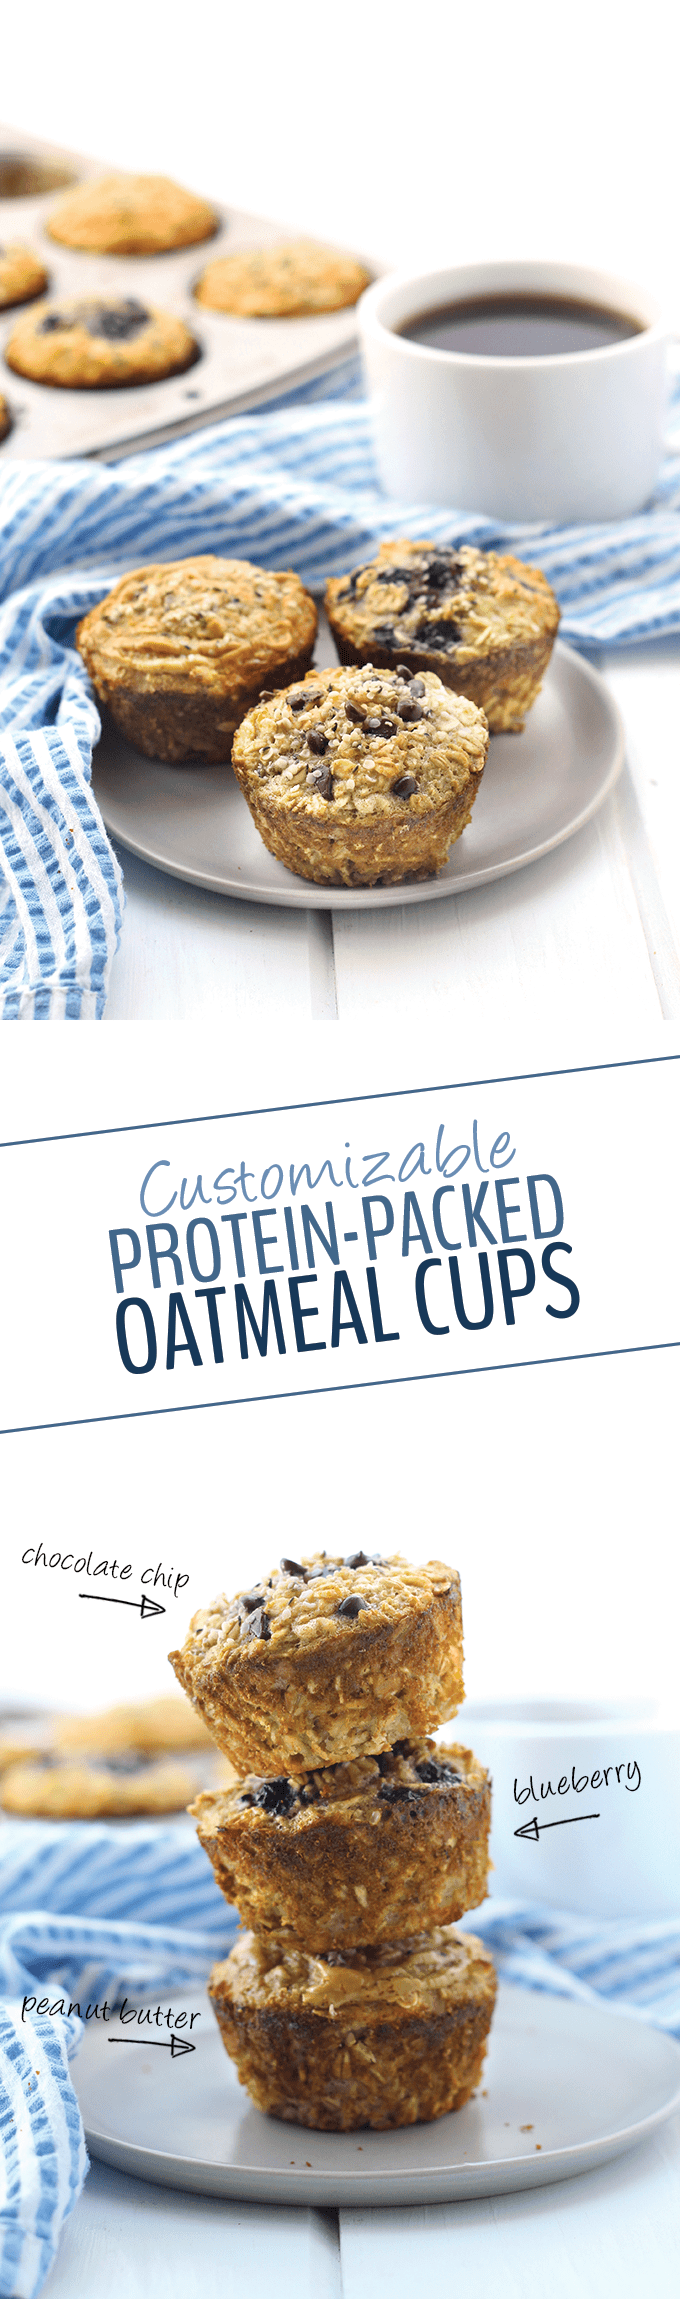 Customizable-Protein-Packed-Oatmeal-Cups-5